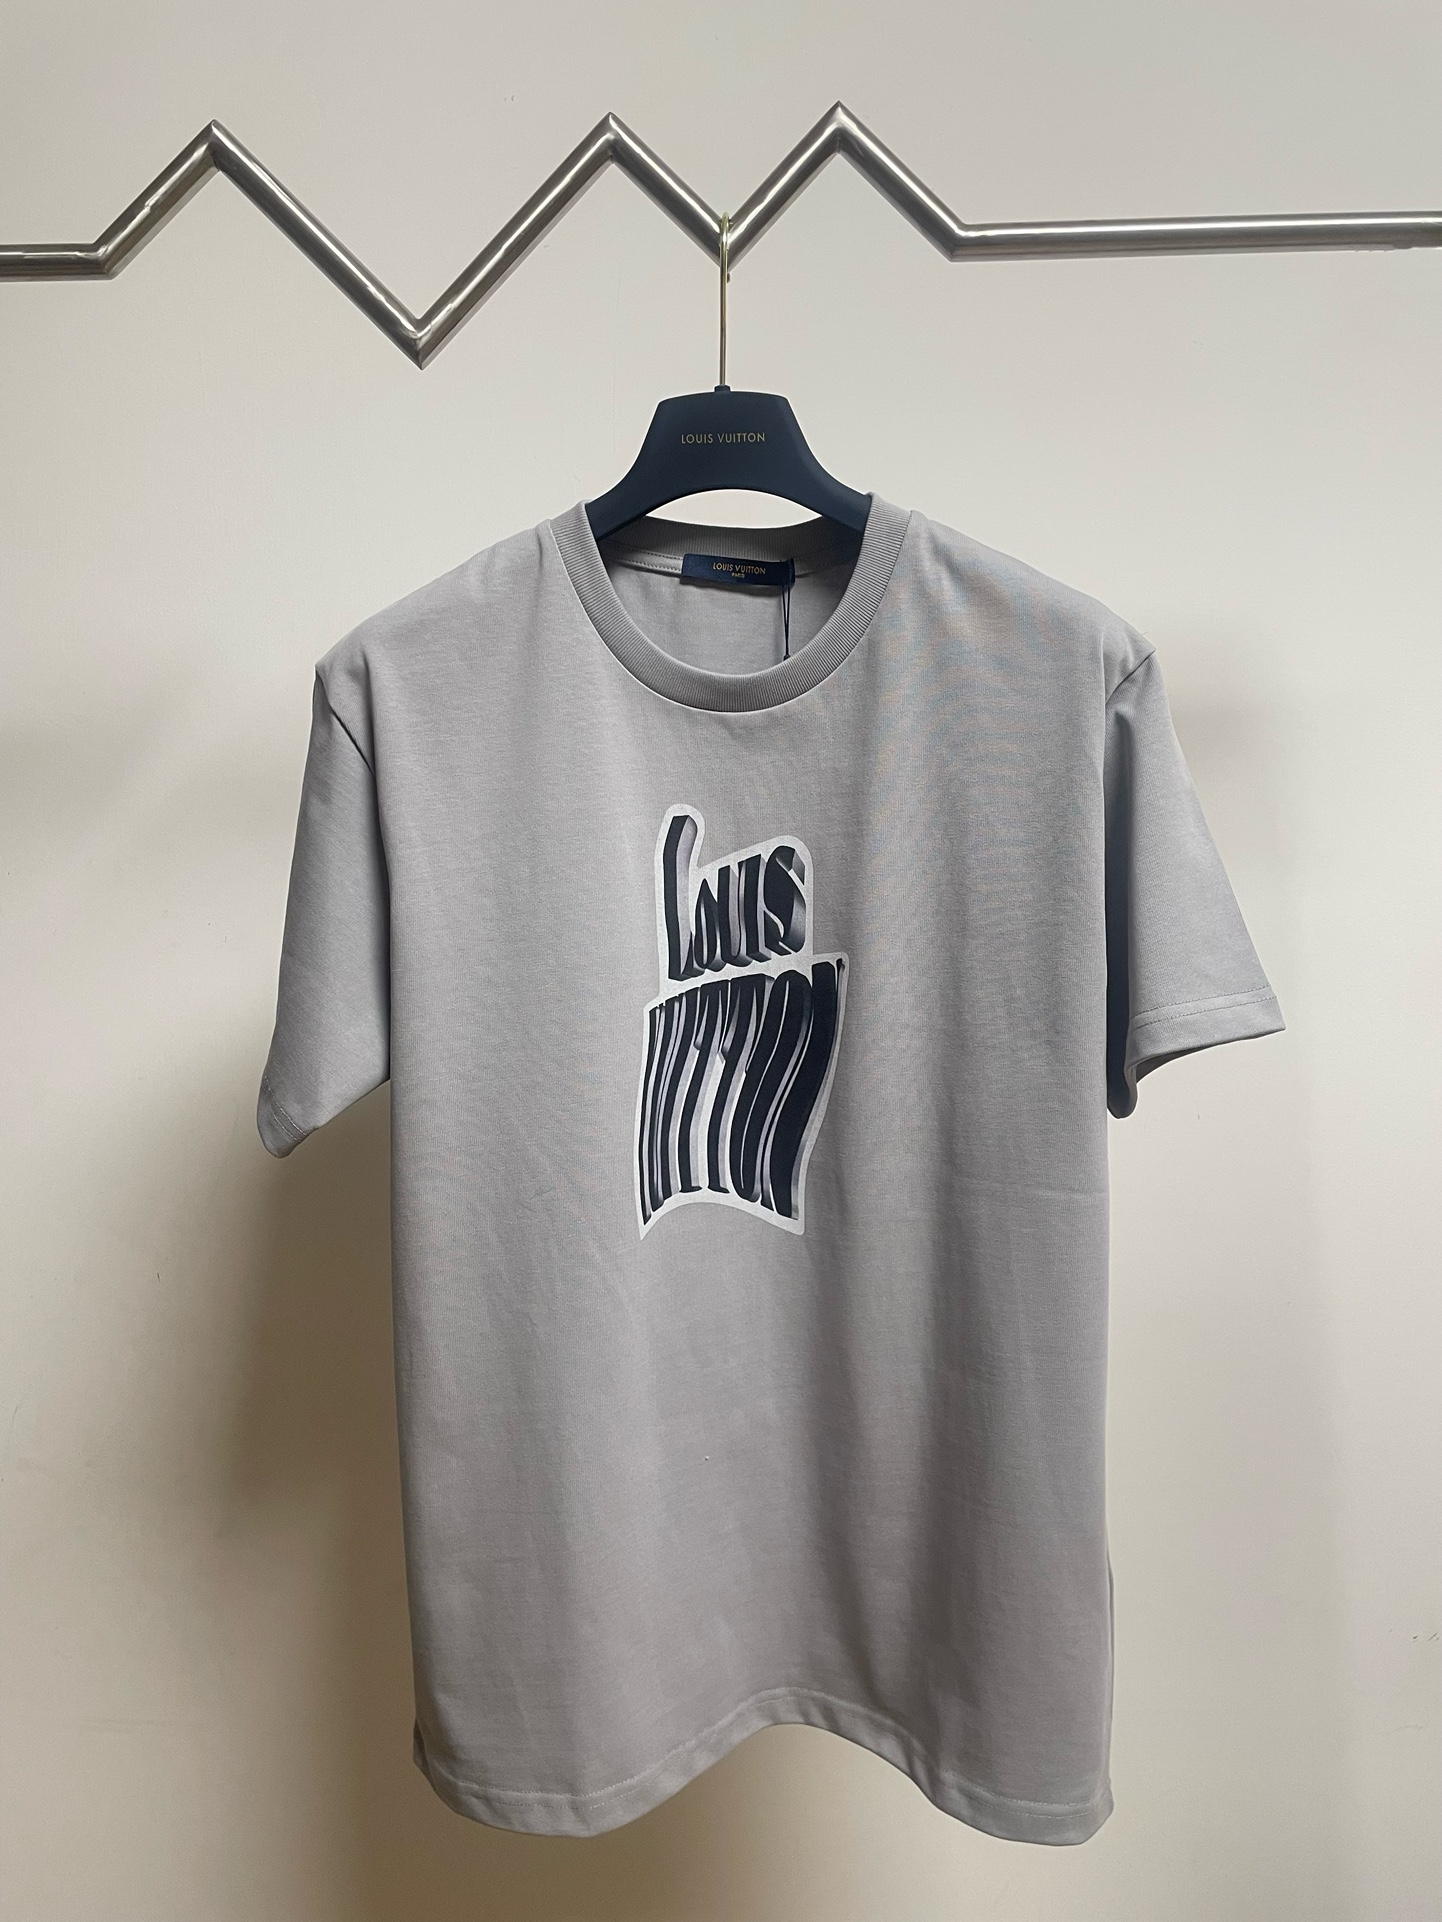 Louis Vuitton Clothing T-Shirt Buying Replica
 Grey Printing Unisex Cotton Spring/Summer Collection Short Sleeve